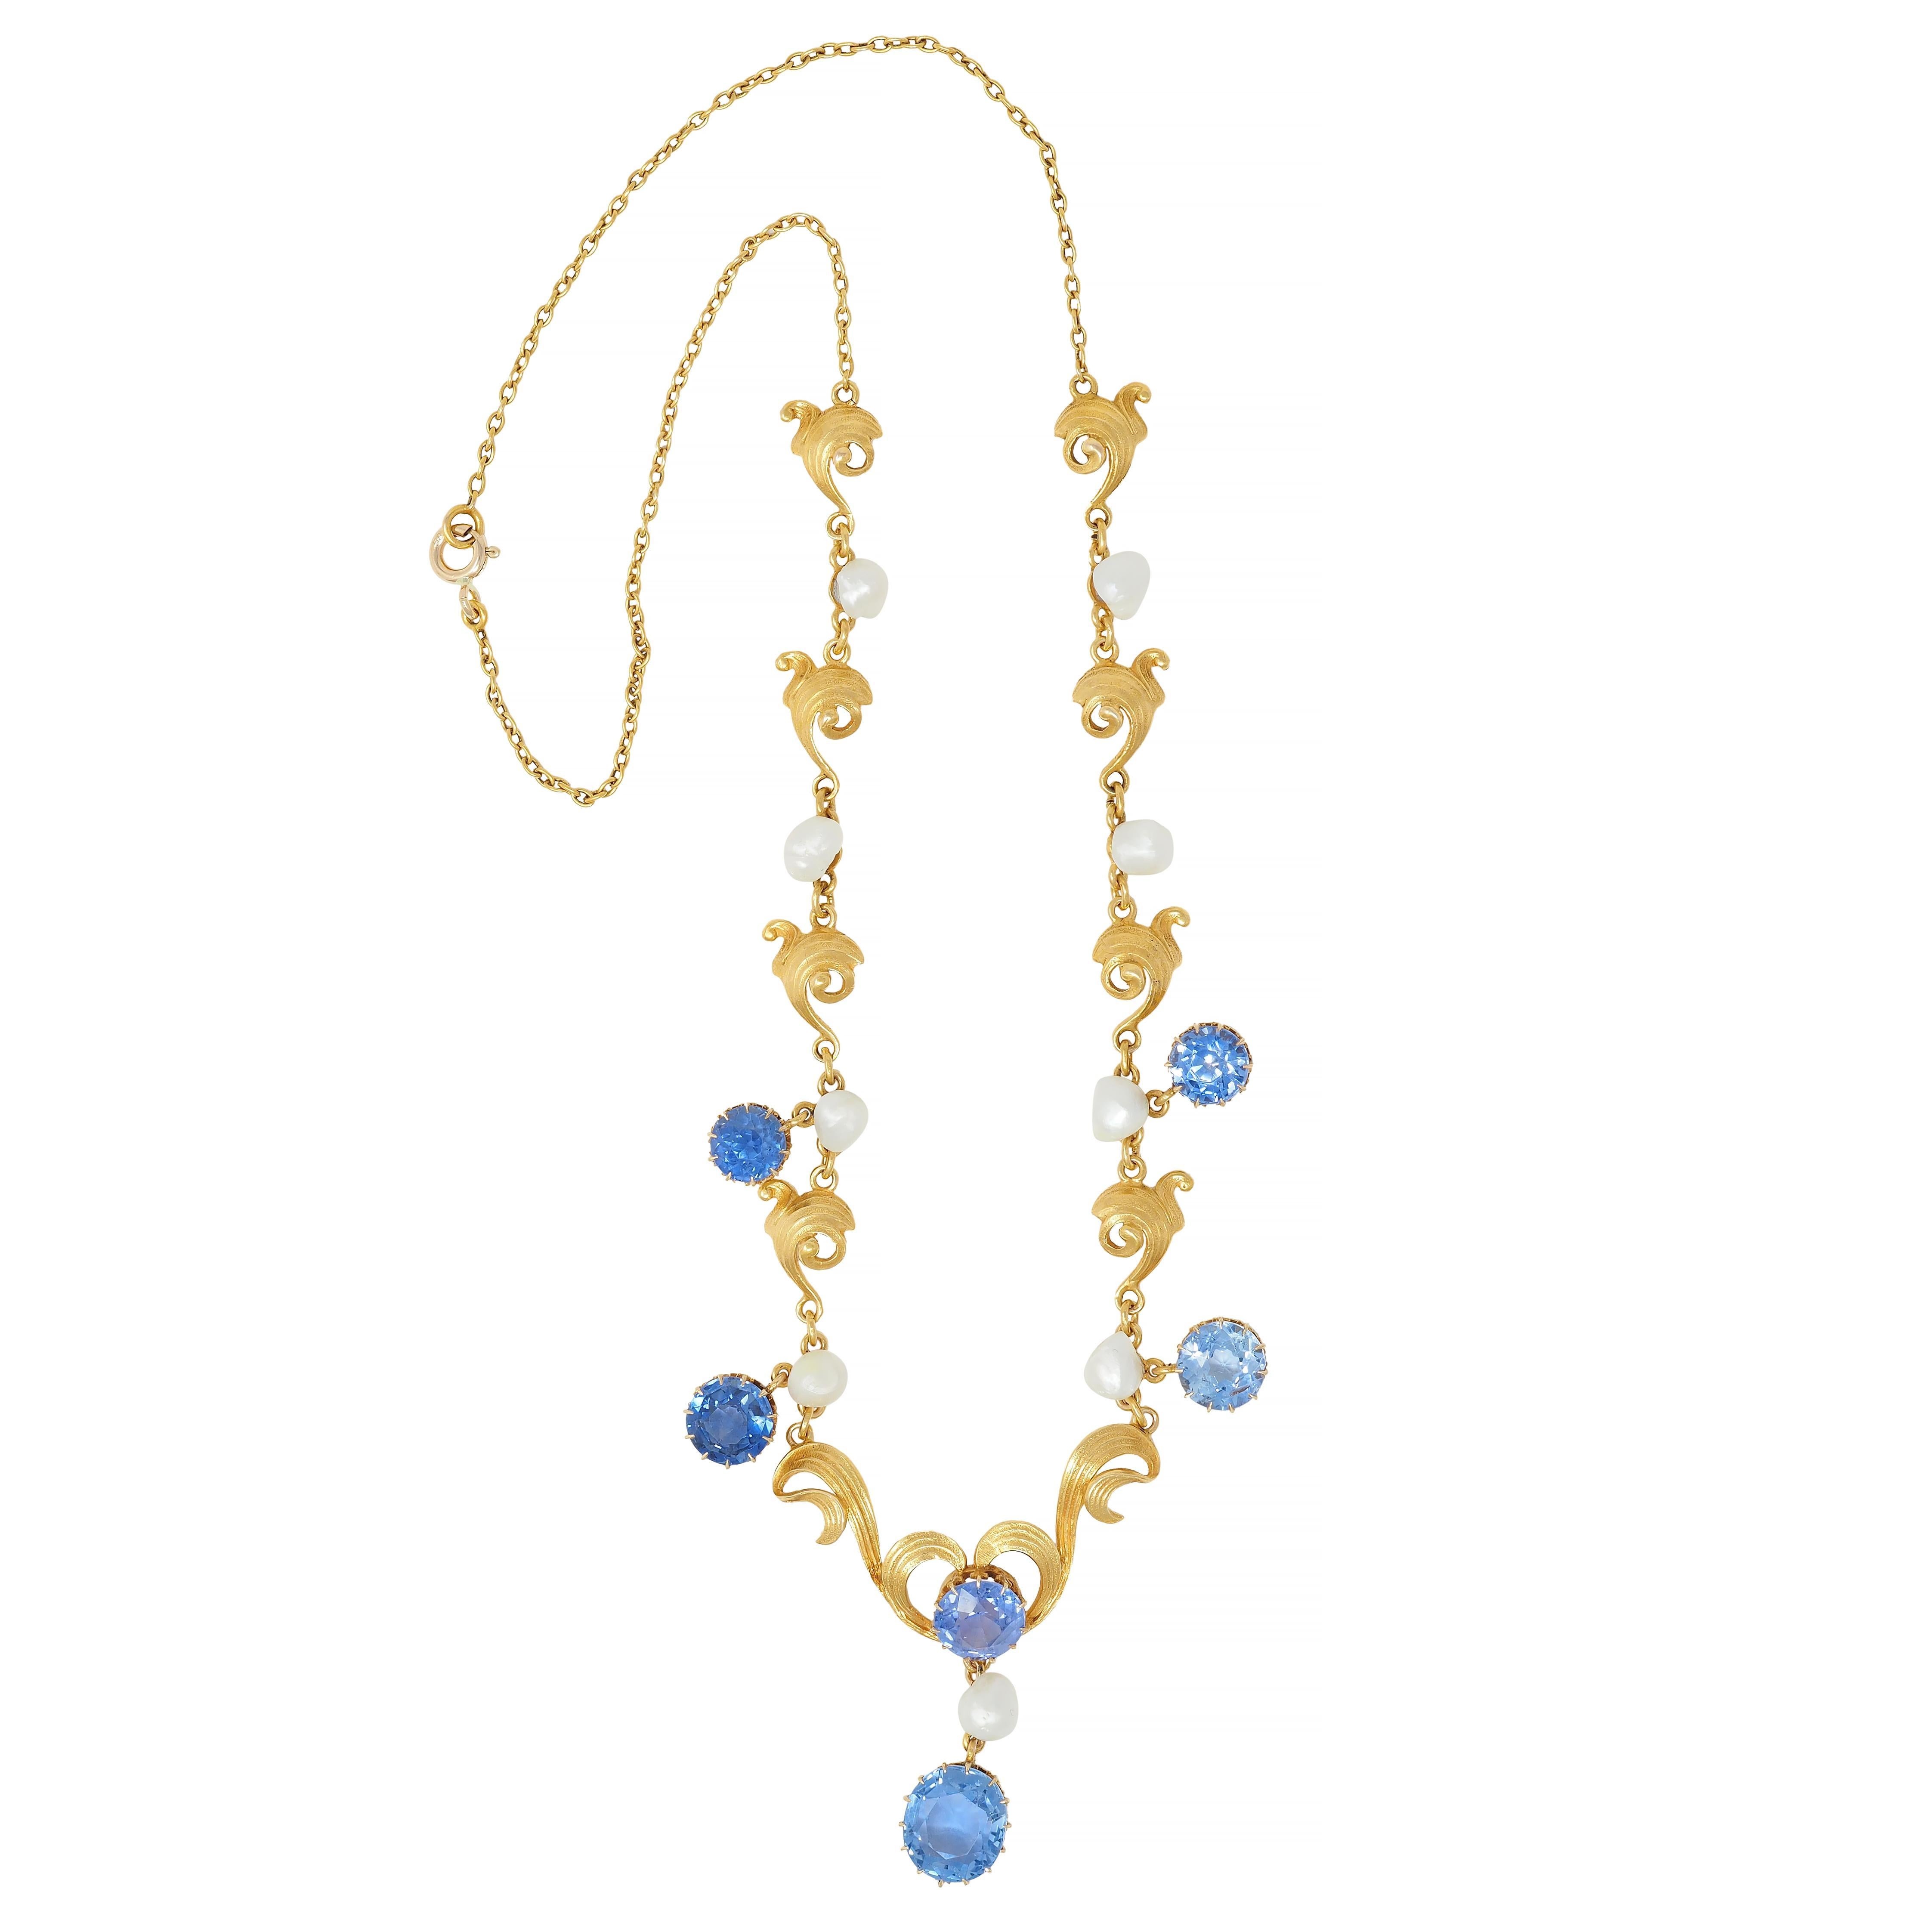 Designed as a station style lavaliere necklace with cable link chain and dimensional scroll motif links
With engraved linear texture throughout - centering a sweeping heart motif suspending drop
Featuring an oval cut sapphire weighing 3.22 carats -